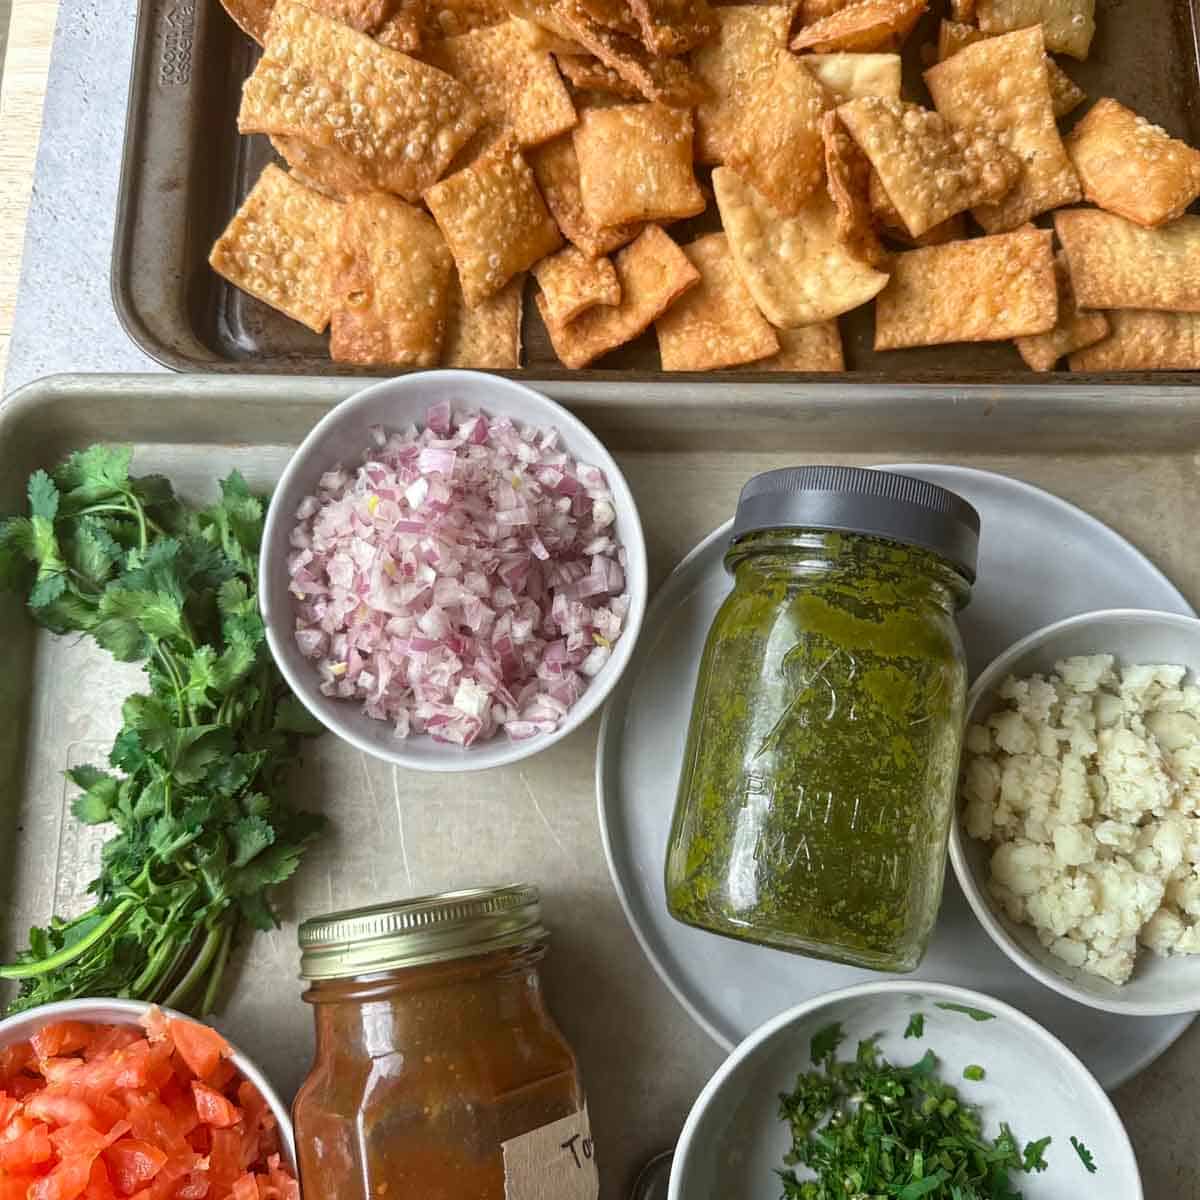 Ingredients of papdi chaat on a sheet tray. From top left to bottom right. Papdi crackers, cilantro, chopped red onion, mint chutney, potatoes, diced tomatoes, tamarind sauce, choped cilantro leaves